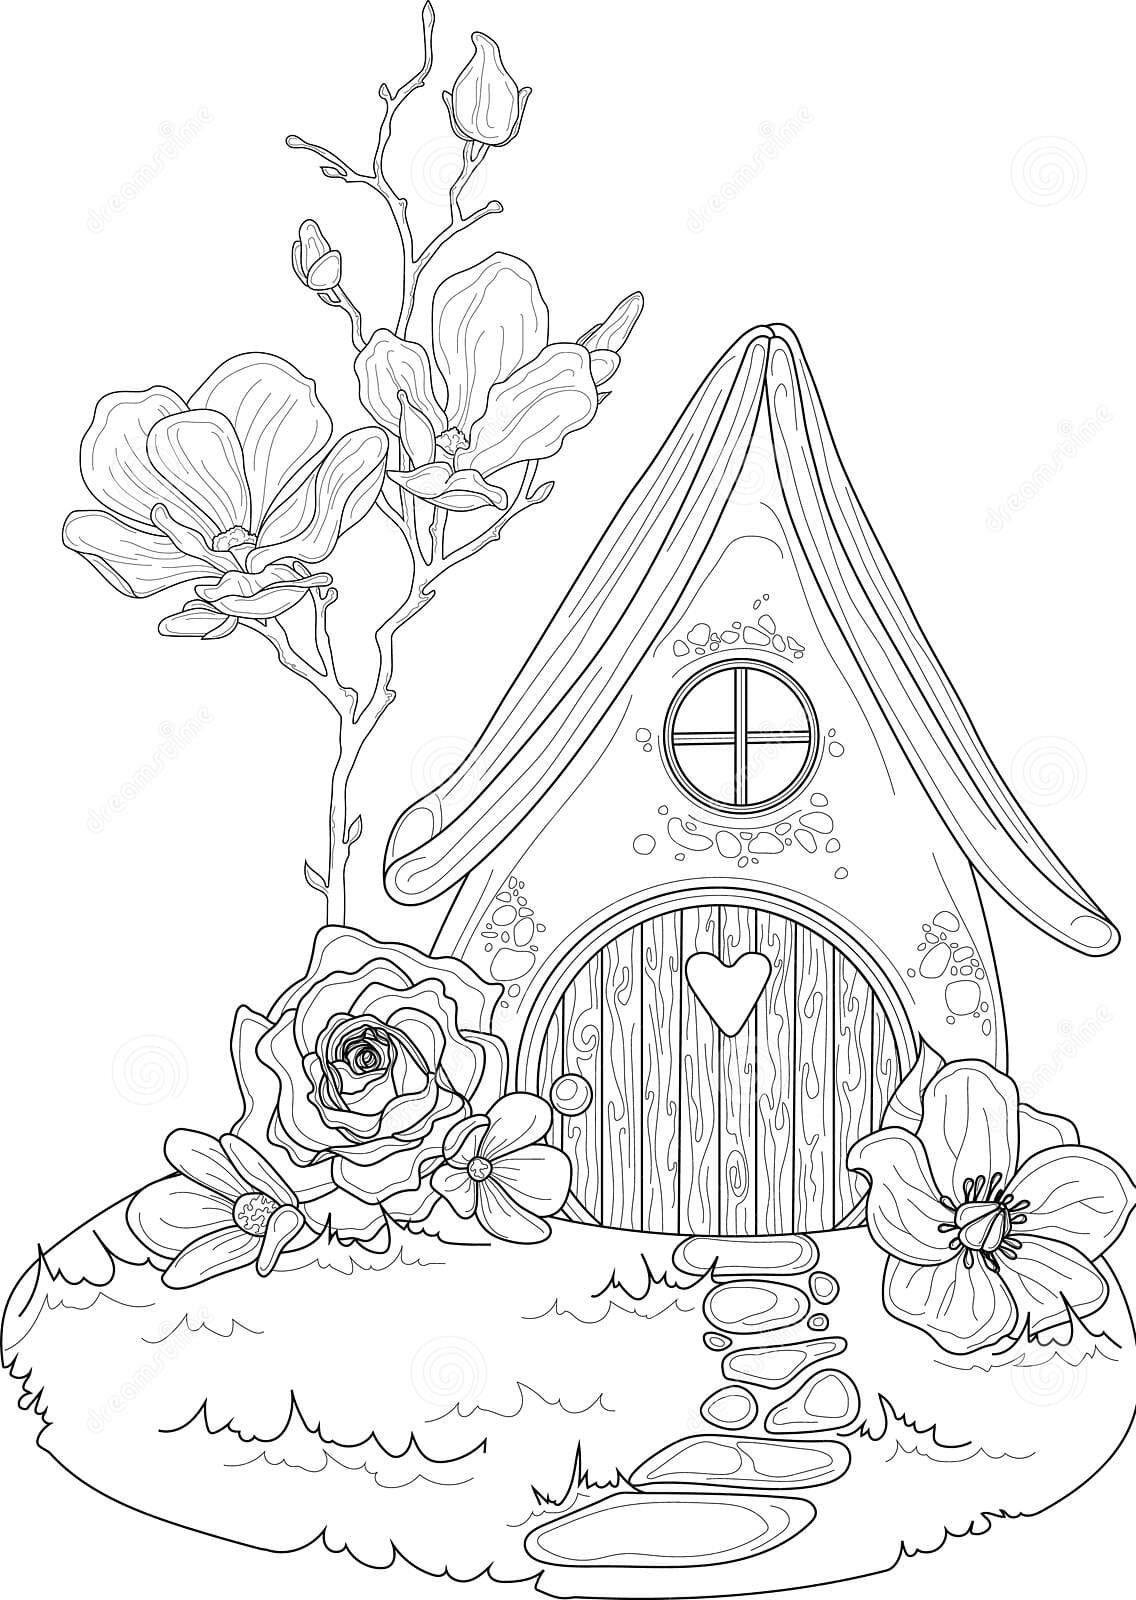 Cartoon Fantasy Graphic Elf House With Roses And Magnolia Flowers